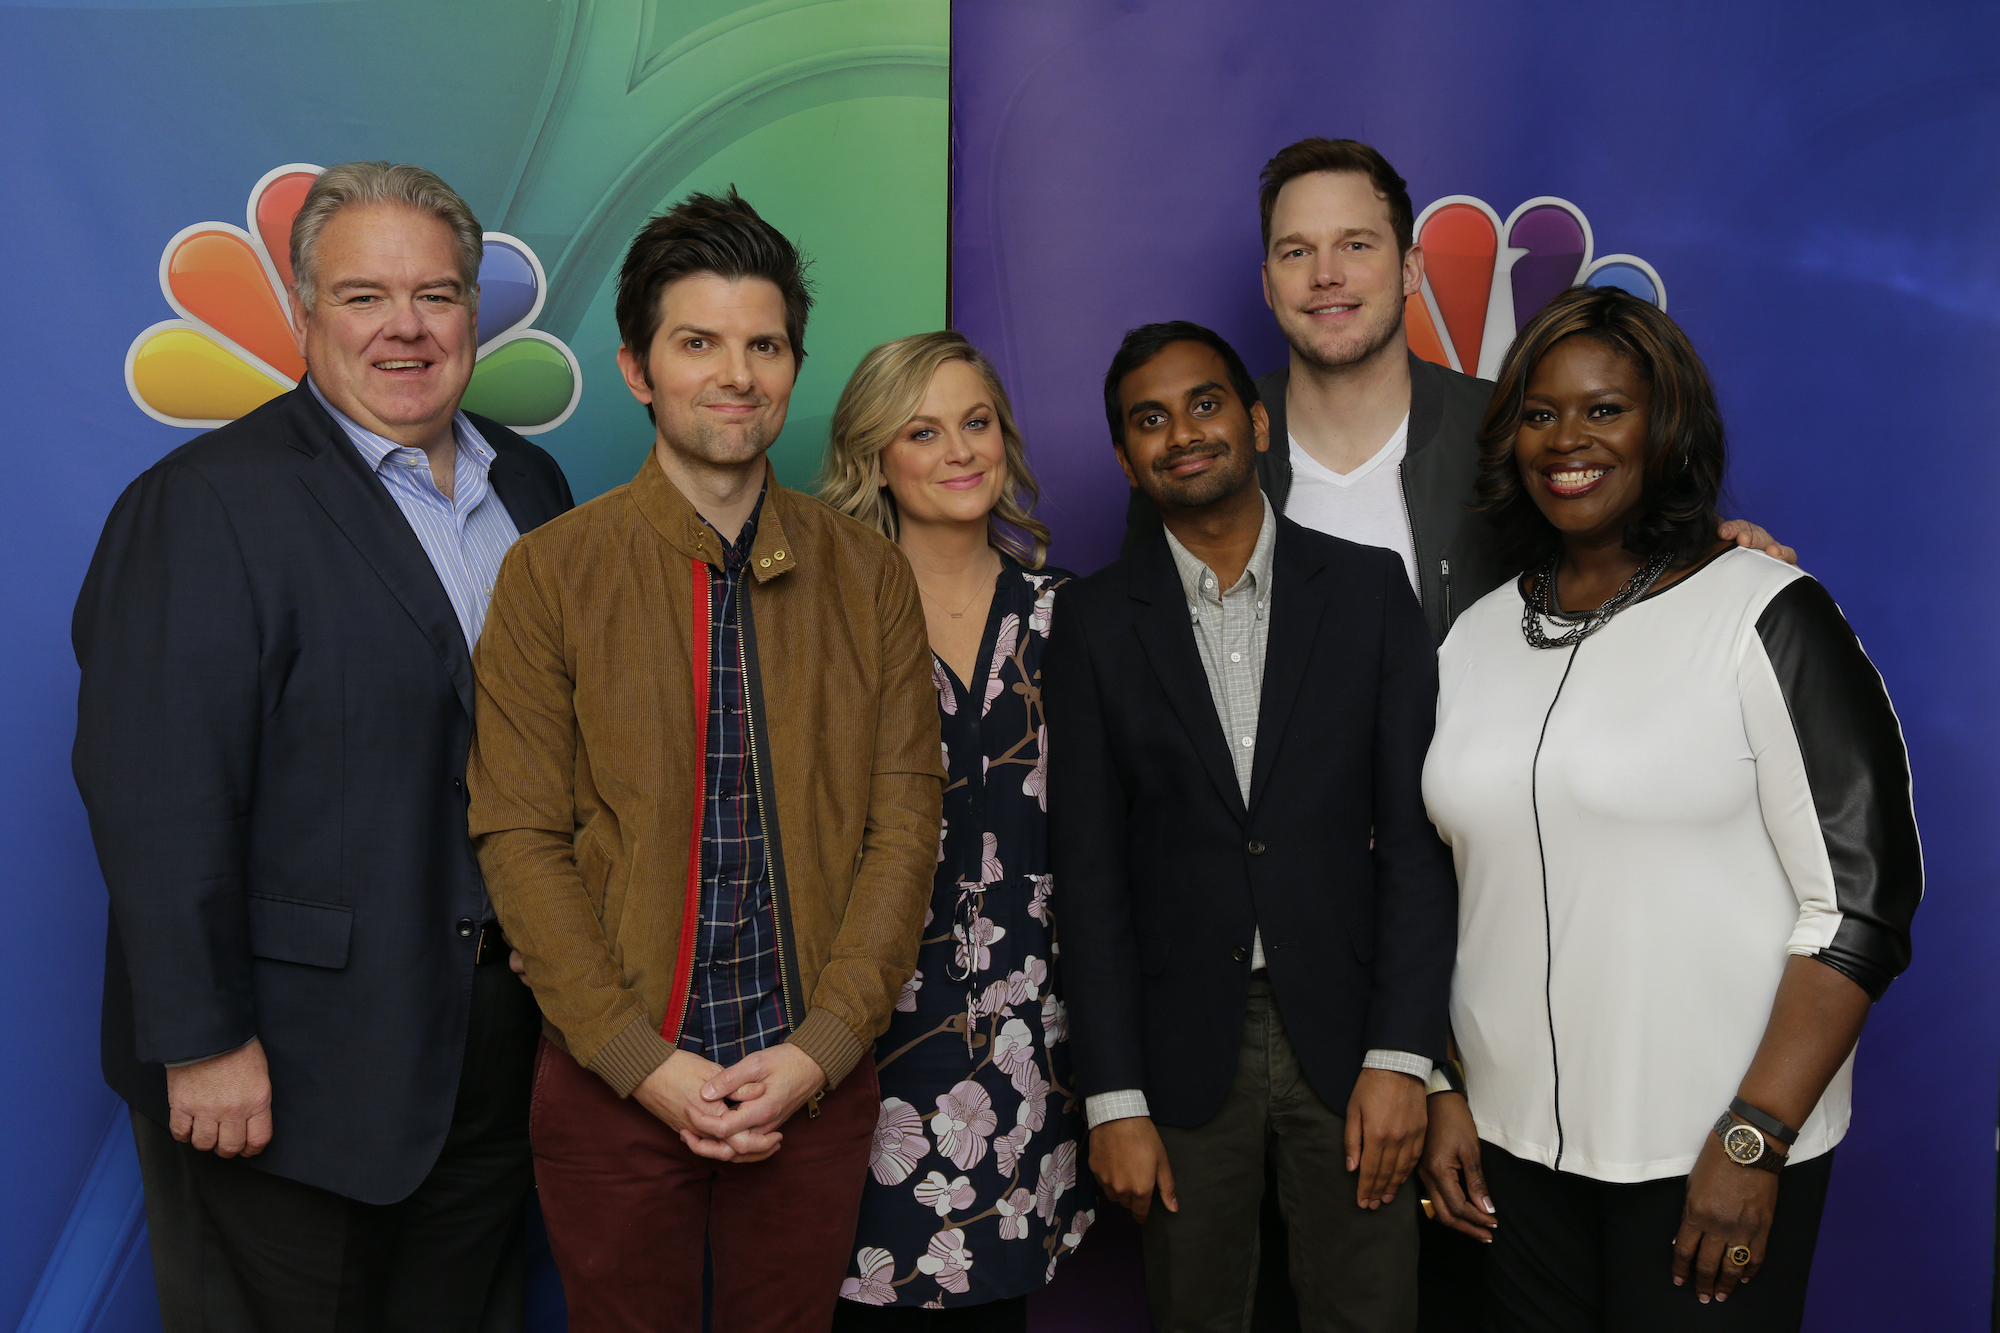 'Parks and Recreation' cast smiling